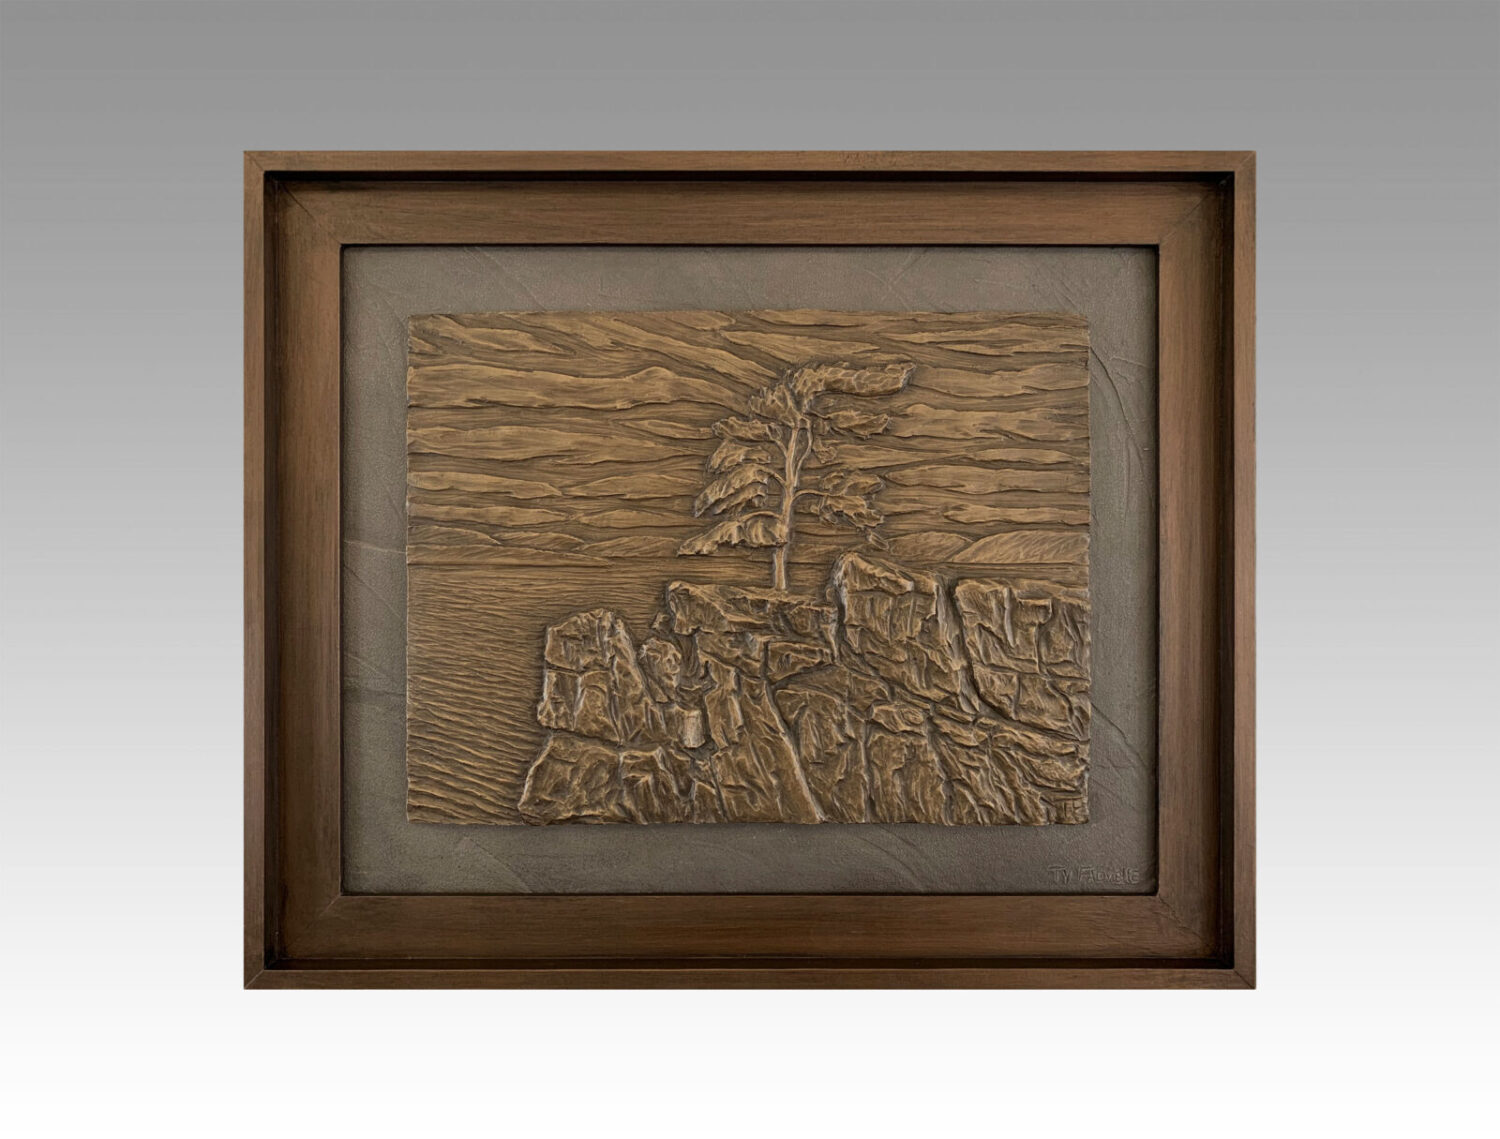 Gallery, Storm Tree, $375 CAD, Metal Infused, 23 ⅜" x 19 ½” (framed), Edition 60, Sculptural Relief of a jack pine blowing in the wind, Sculptor Tyler Fauvelle